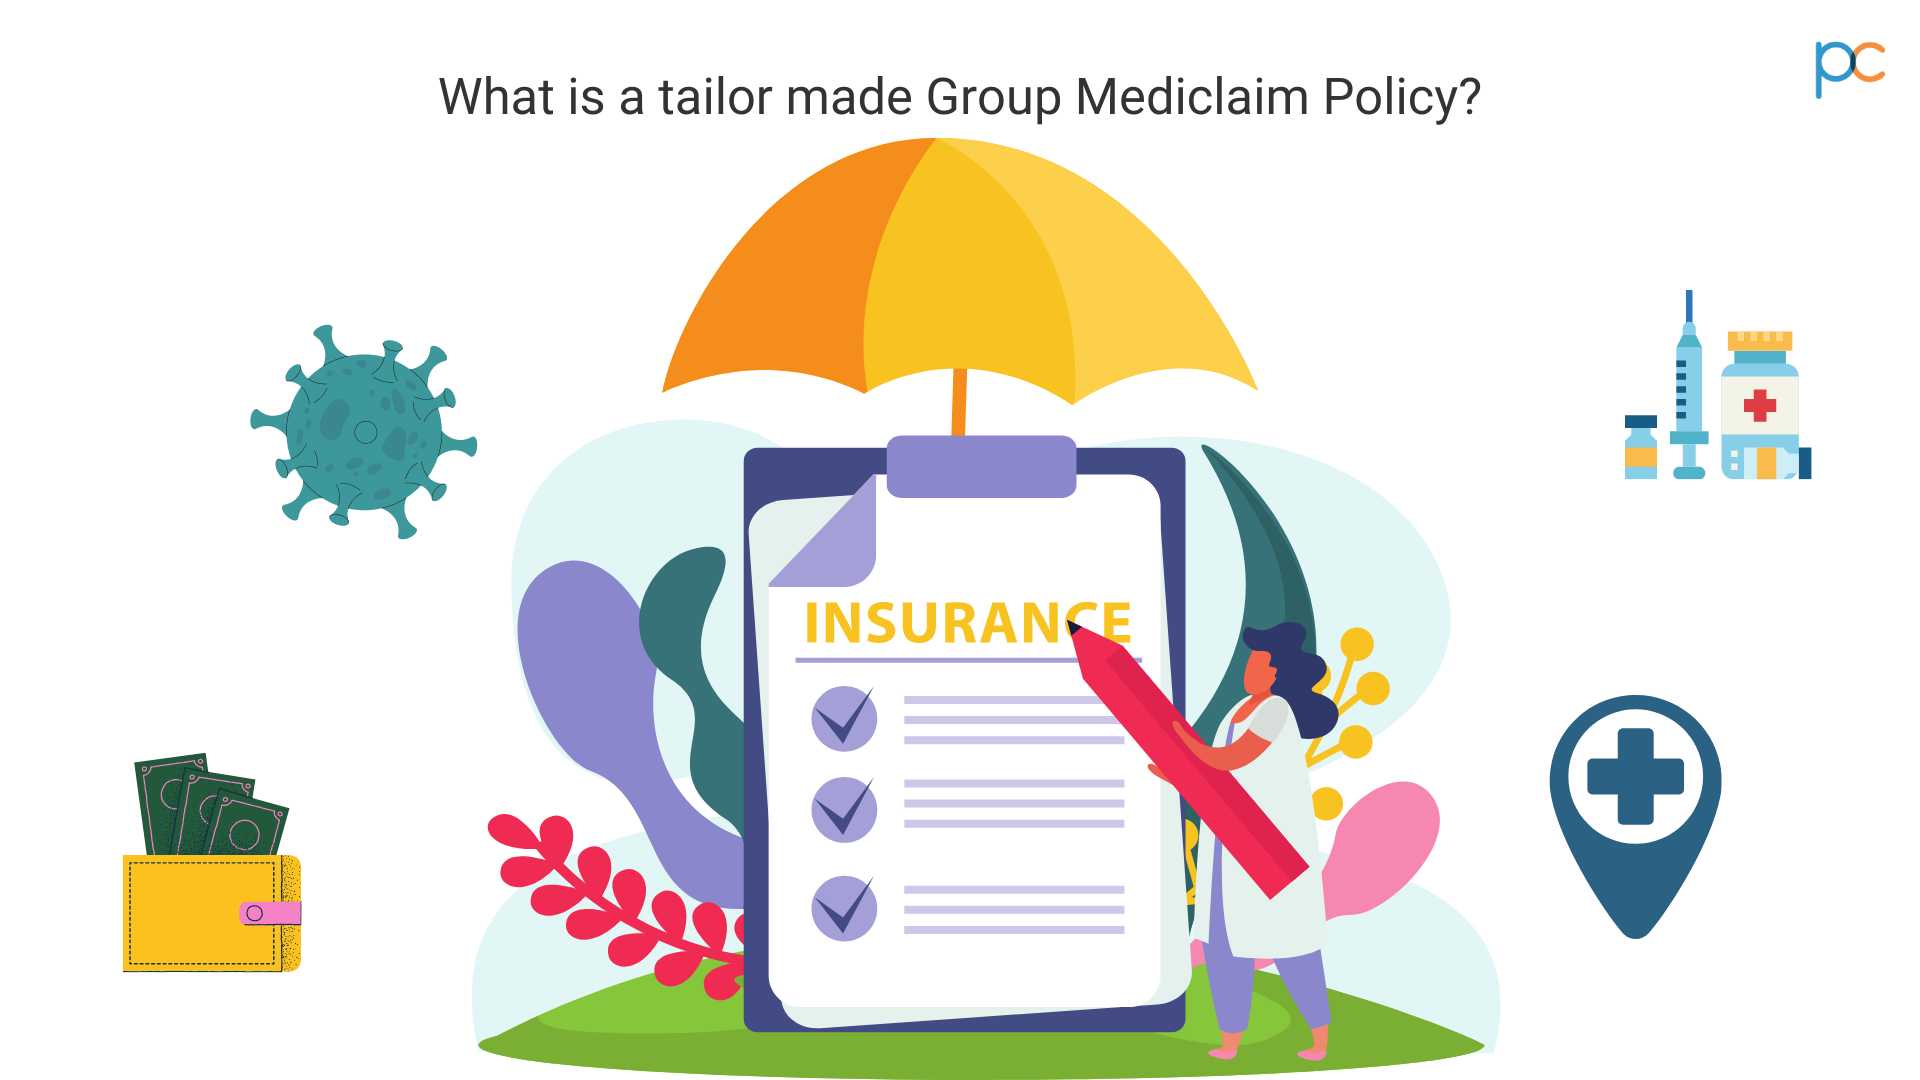 What is a tailor made Group Mediclaim Policy